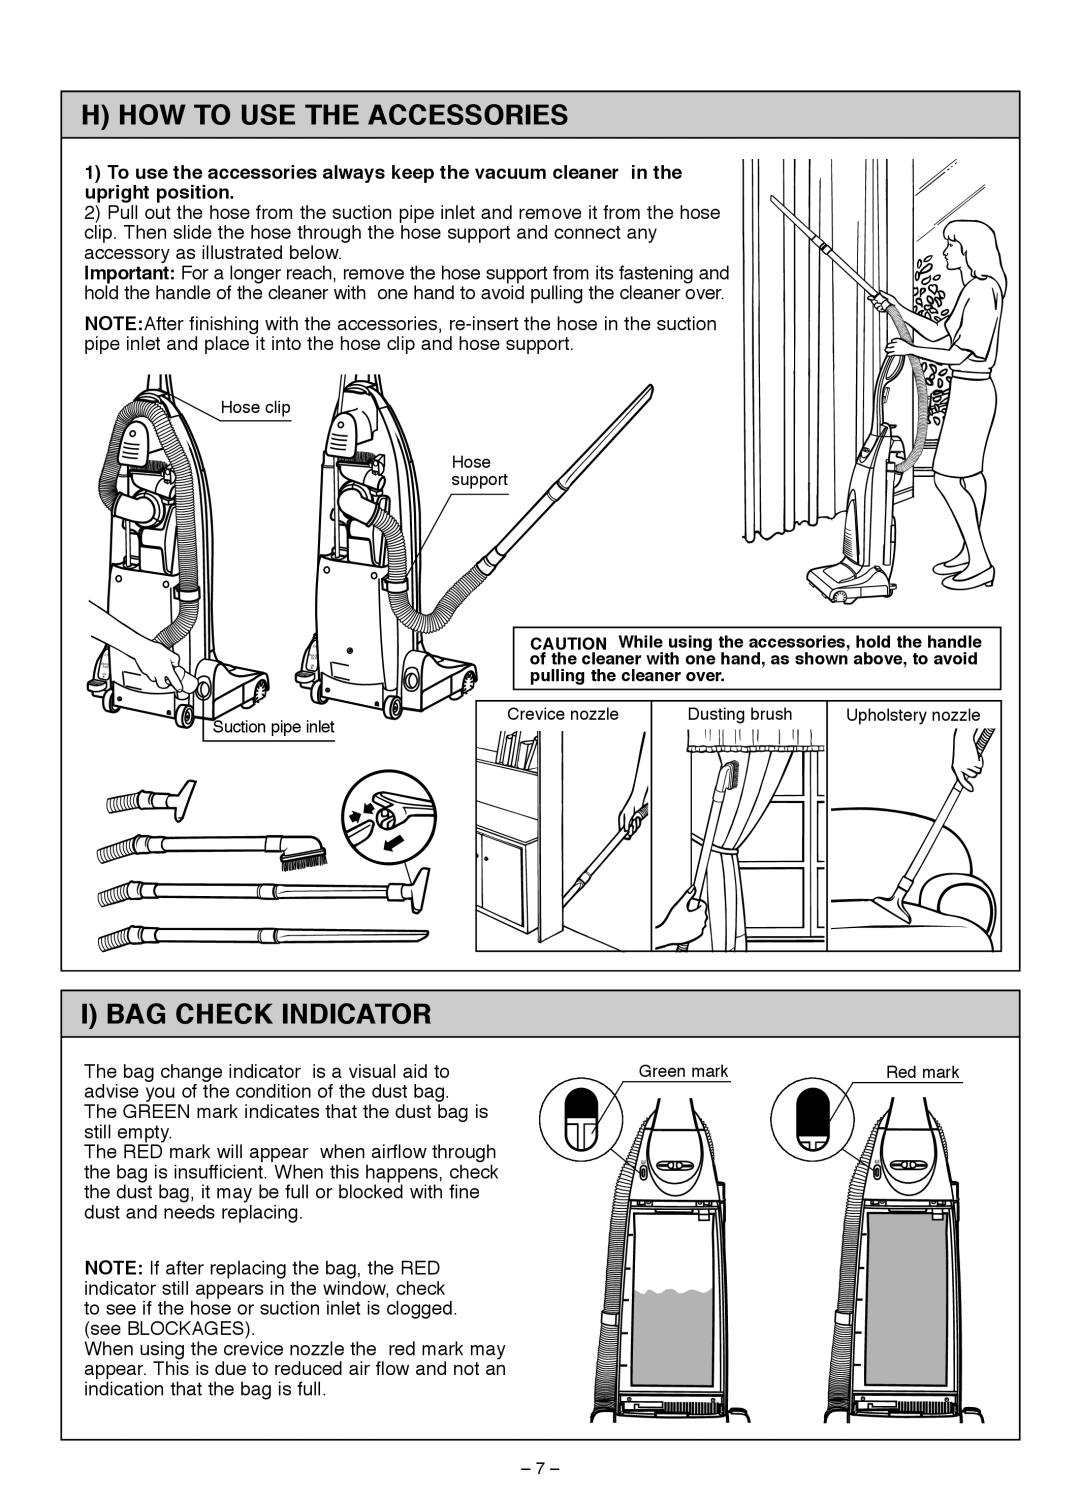 Miele S185 important safety instructions H How To Use The Accessories, I Bag Check Indicator 